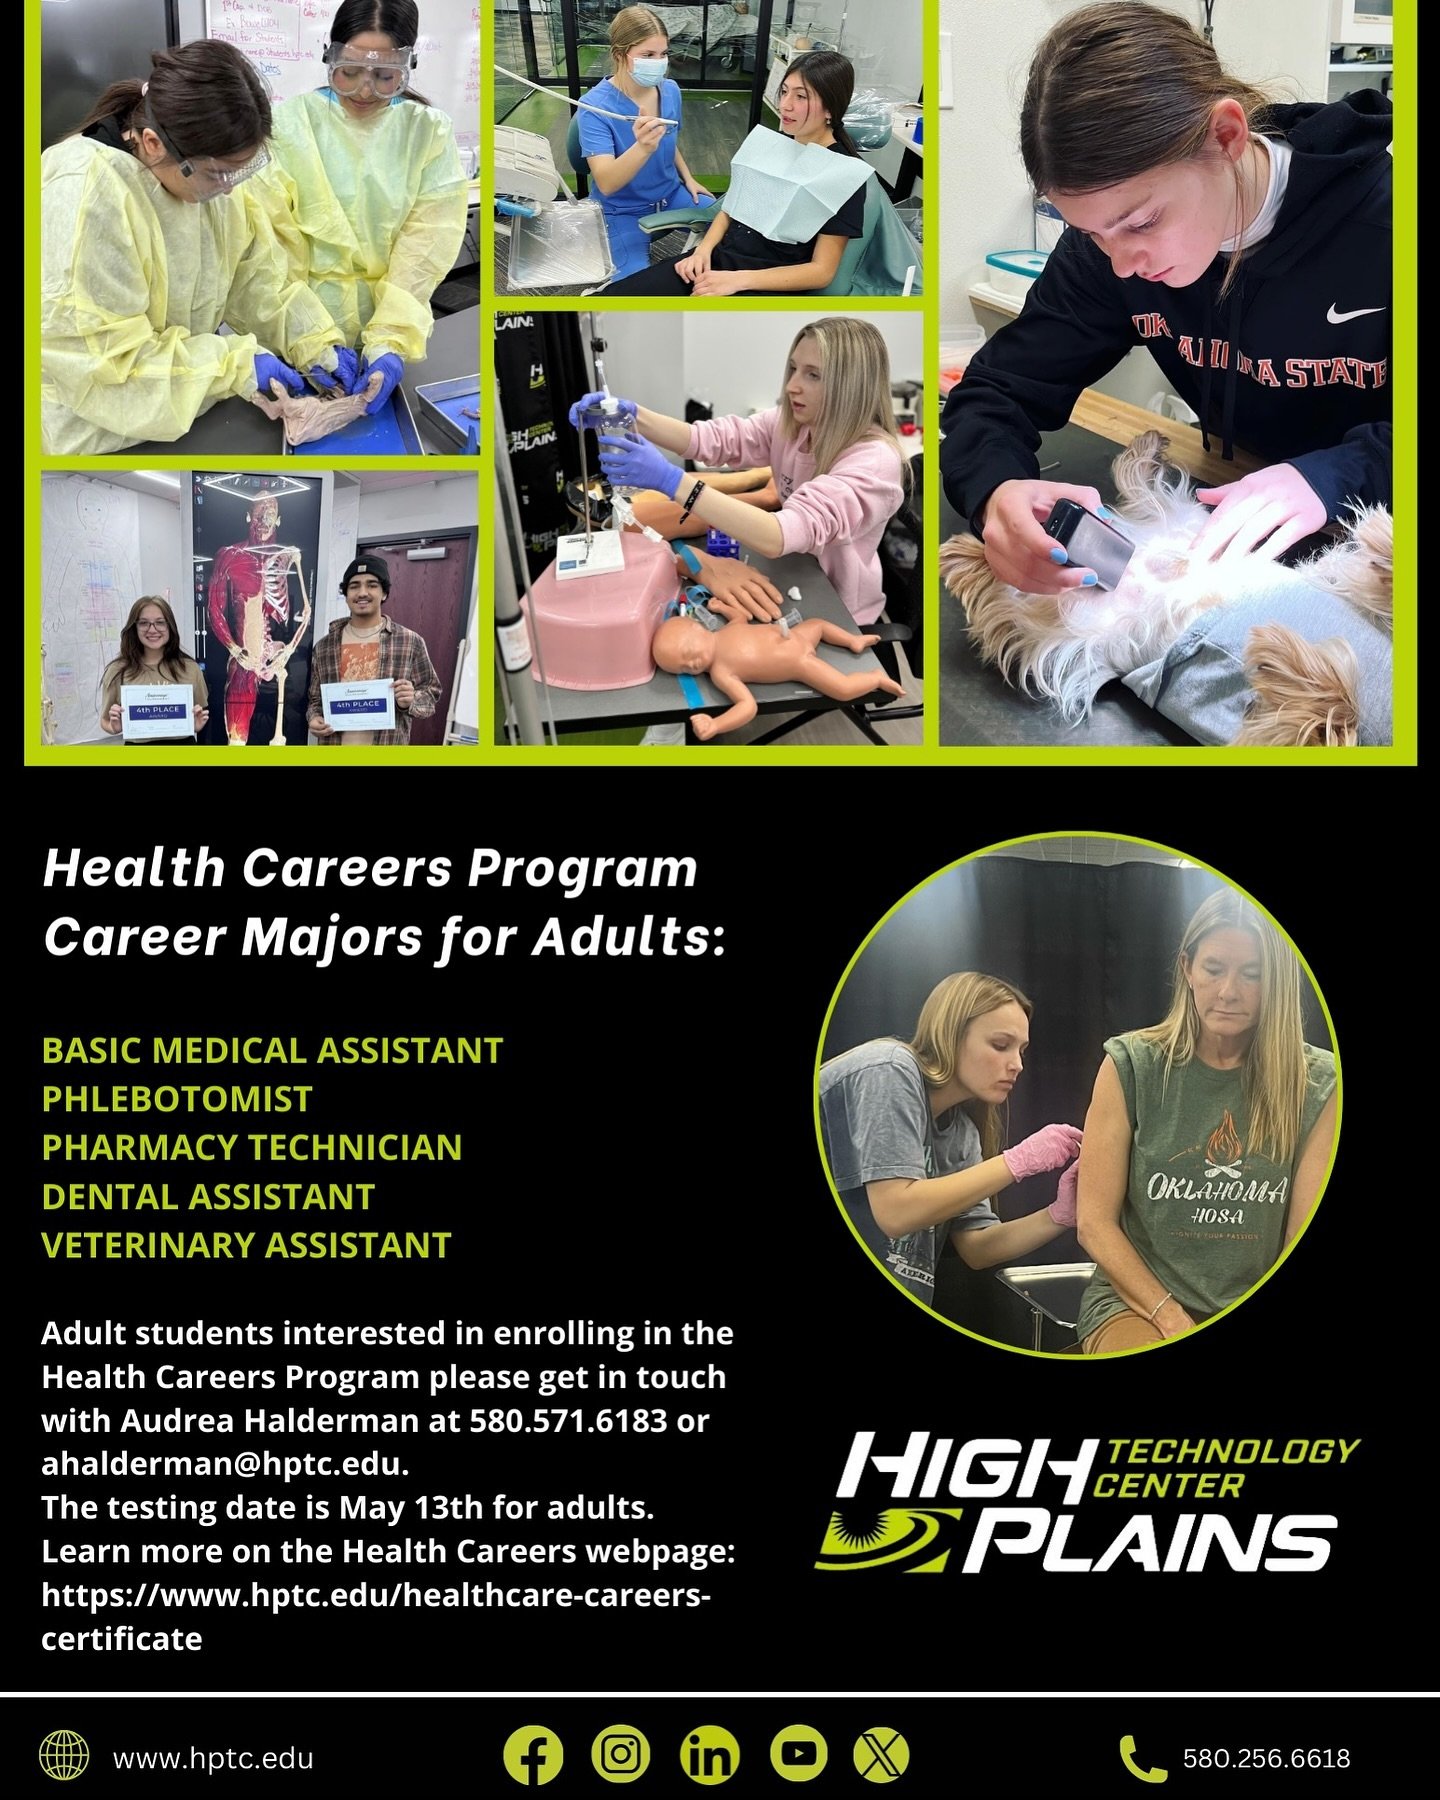 If you have a passion for healthcare and are looking to pursue a career in the medical field, our Health Careers Program is the perfect opportunity for you. 

HPTC provides a range of career majors for adults, such as Basic Medical Assistant, Phlebot